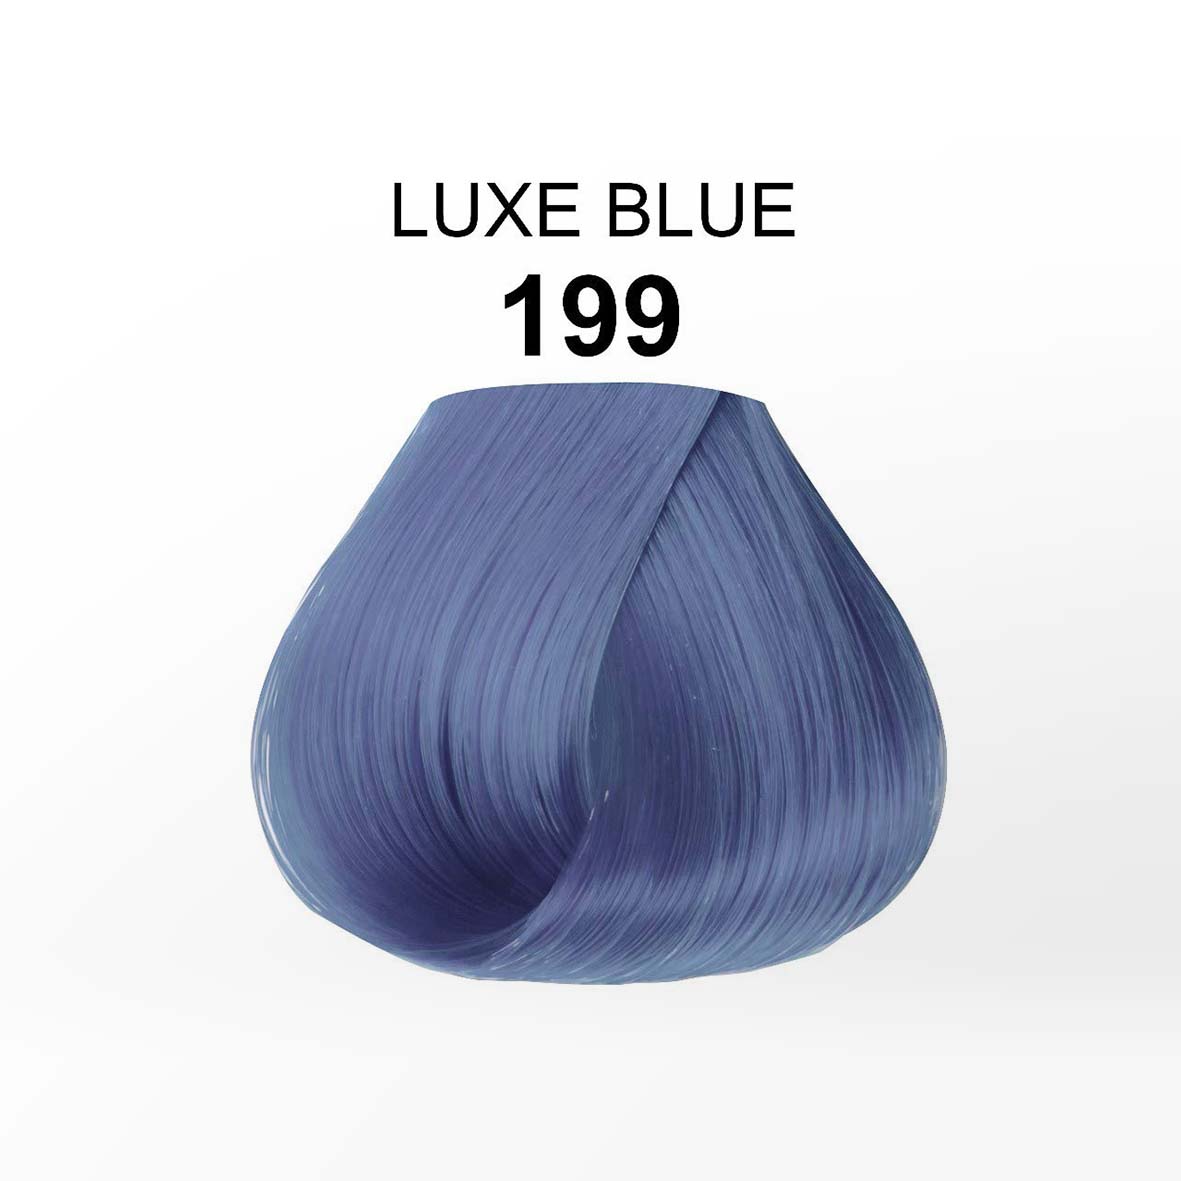 ADORE SHINING SEMI-PERMANENT HAIR COLOR LUXE BLUE (199)